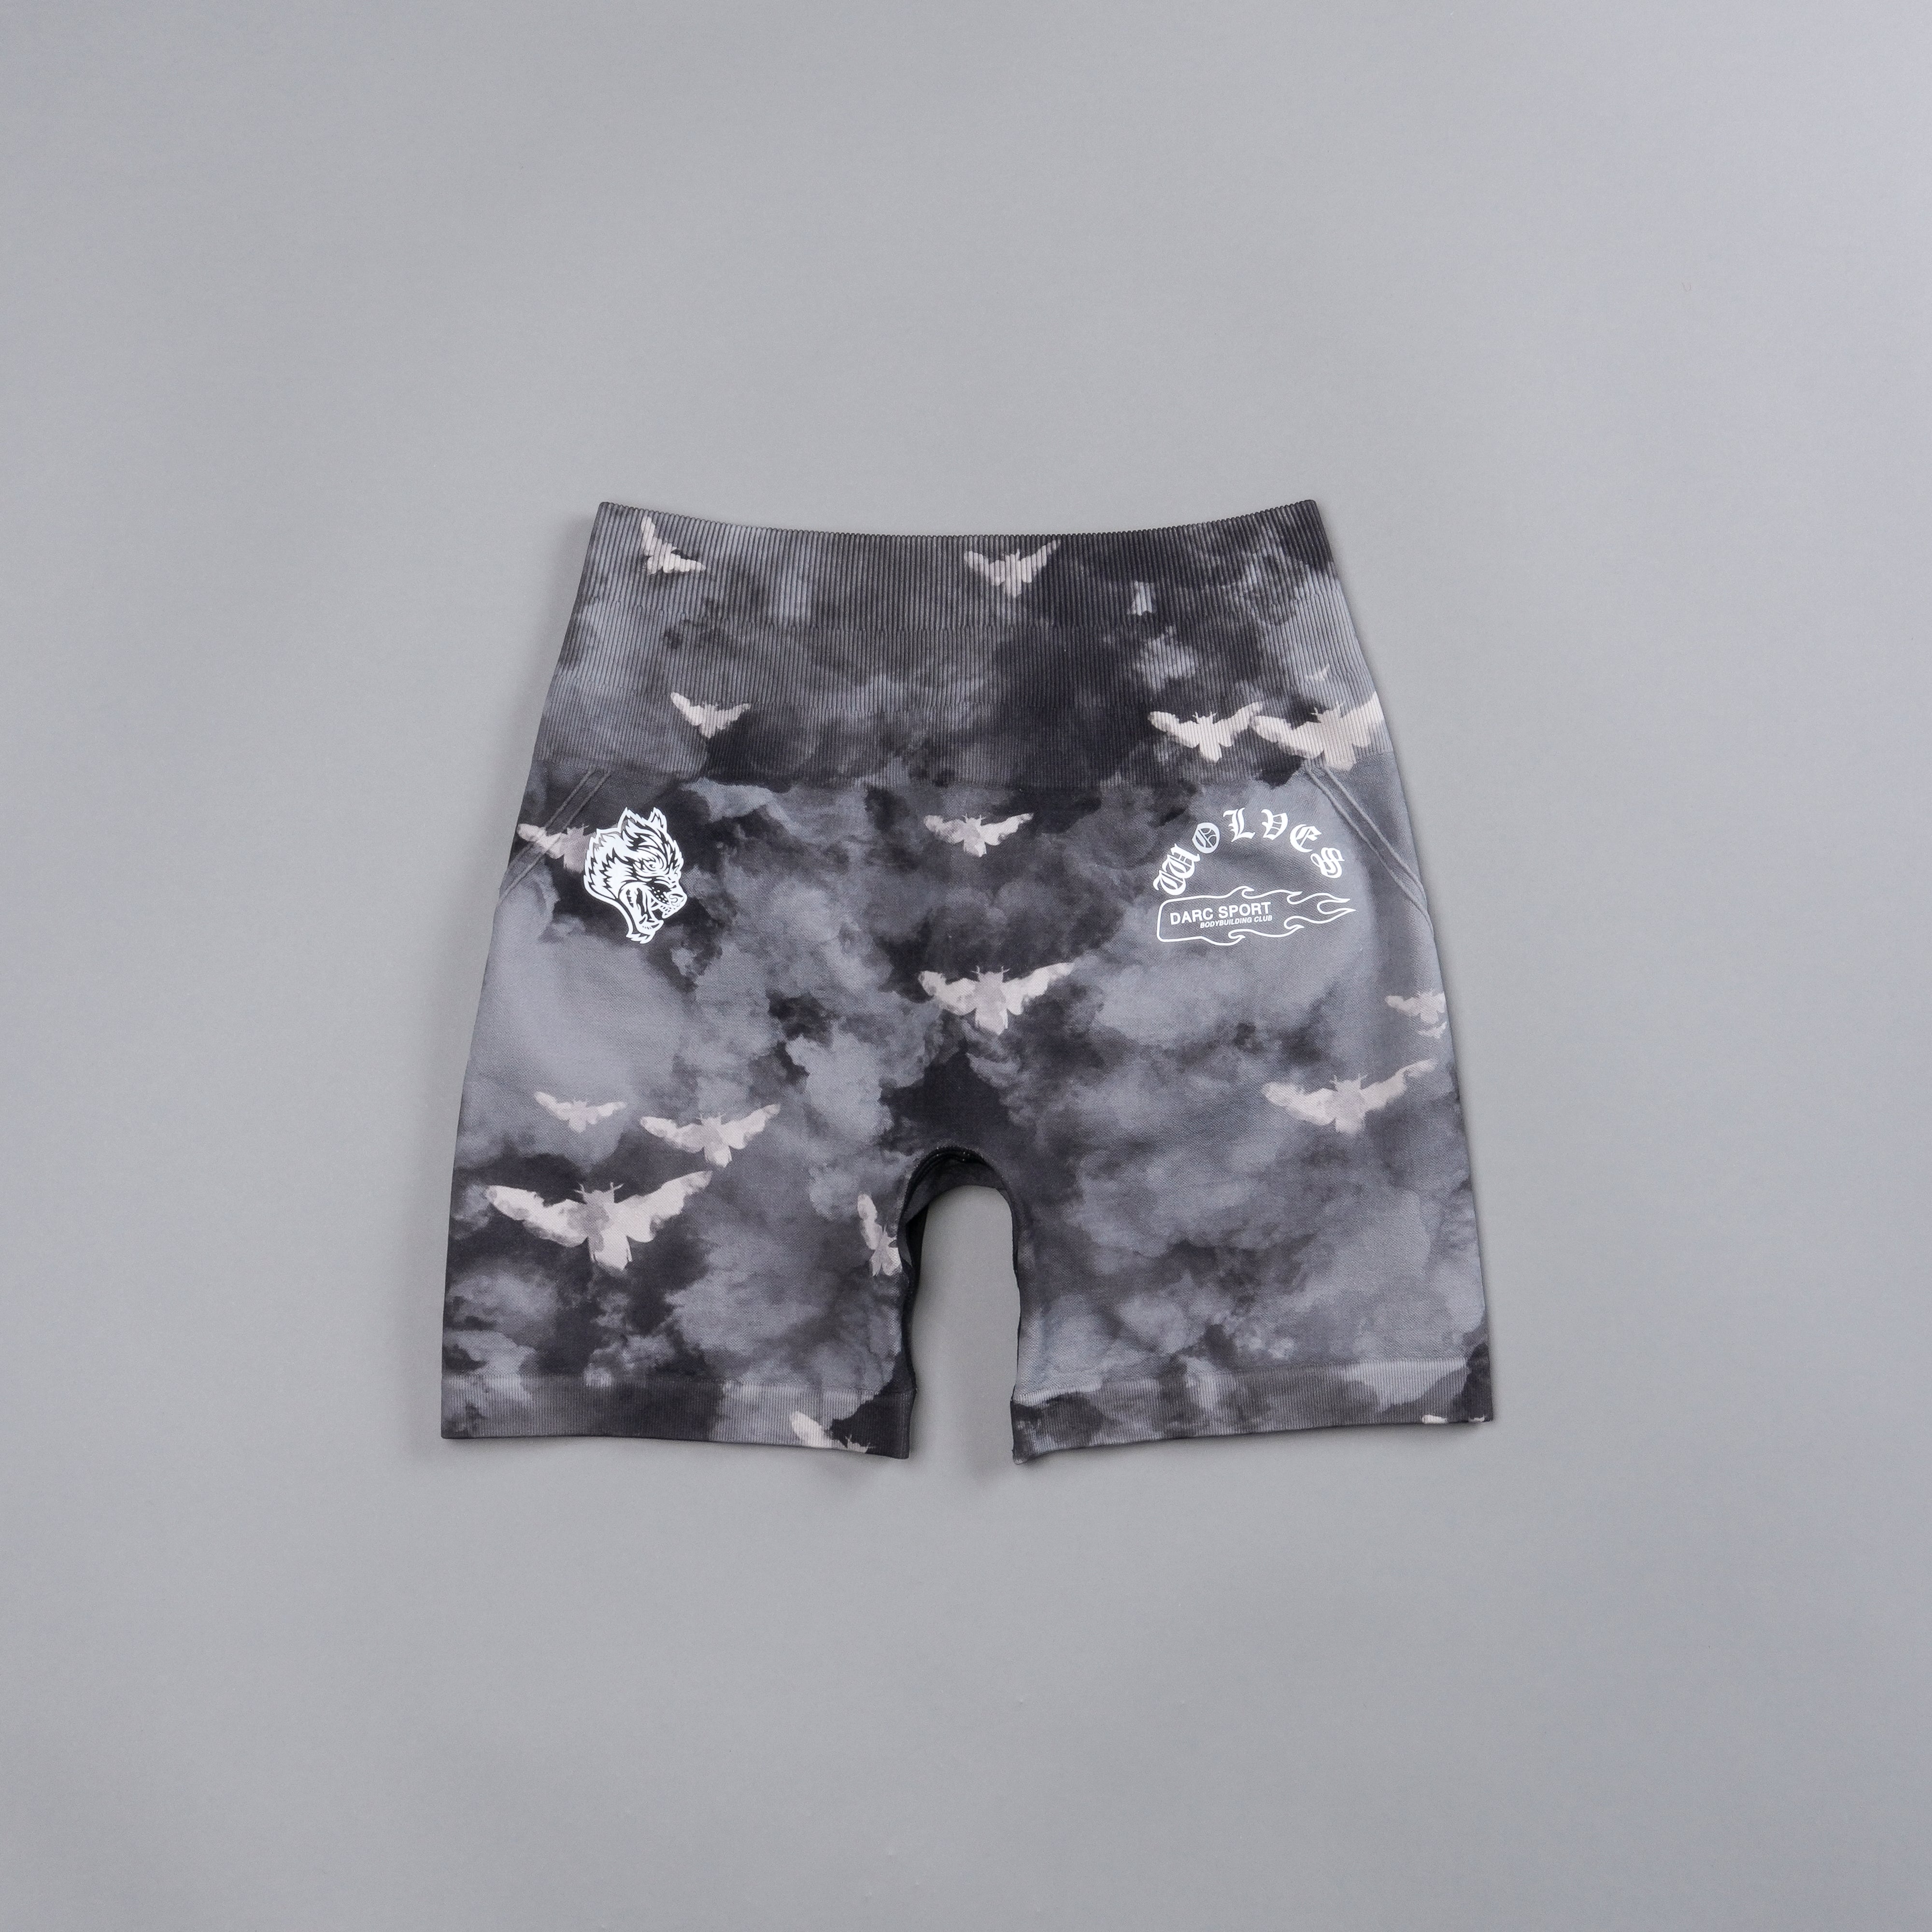 Never Forgotten Everson Seamless "Huxley" Shorts in Black Death Moth Ghost Clouds